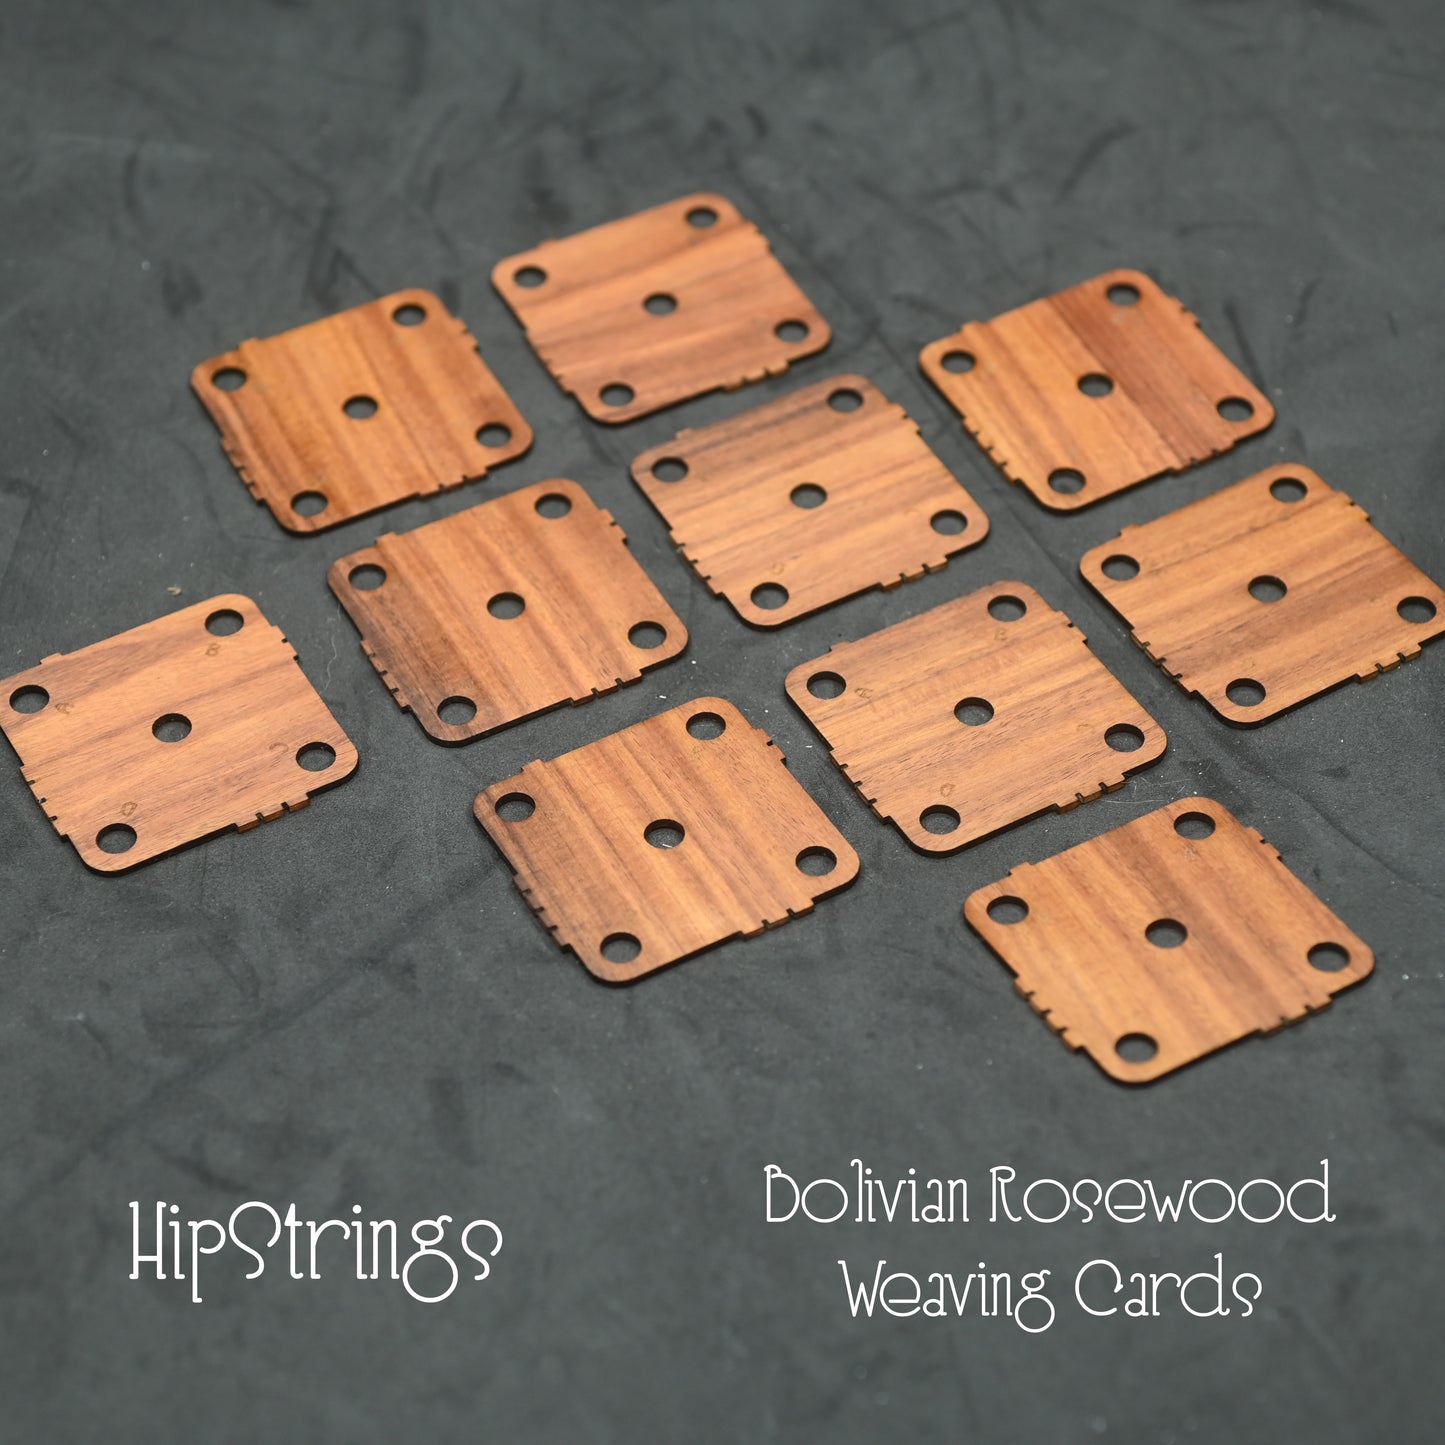 Hardwood Weaving Cards - Set of 10, 1.75 inches